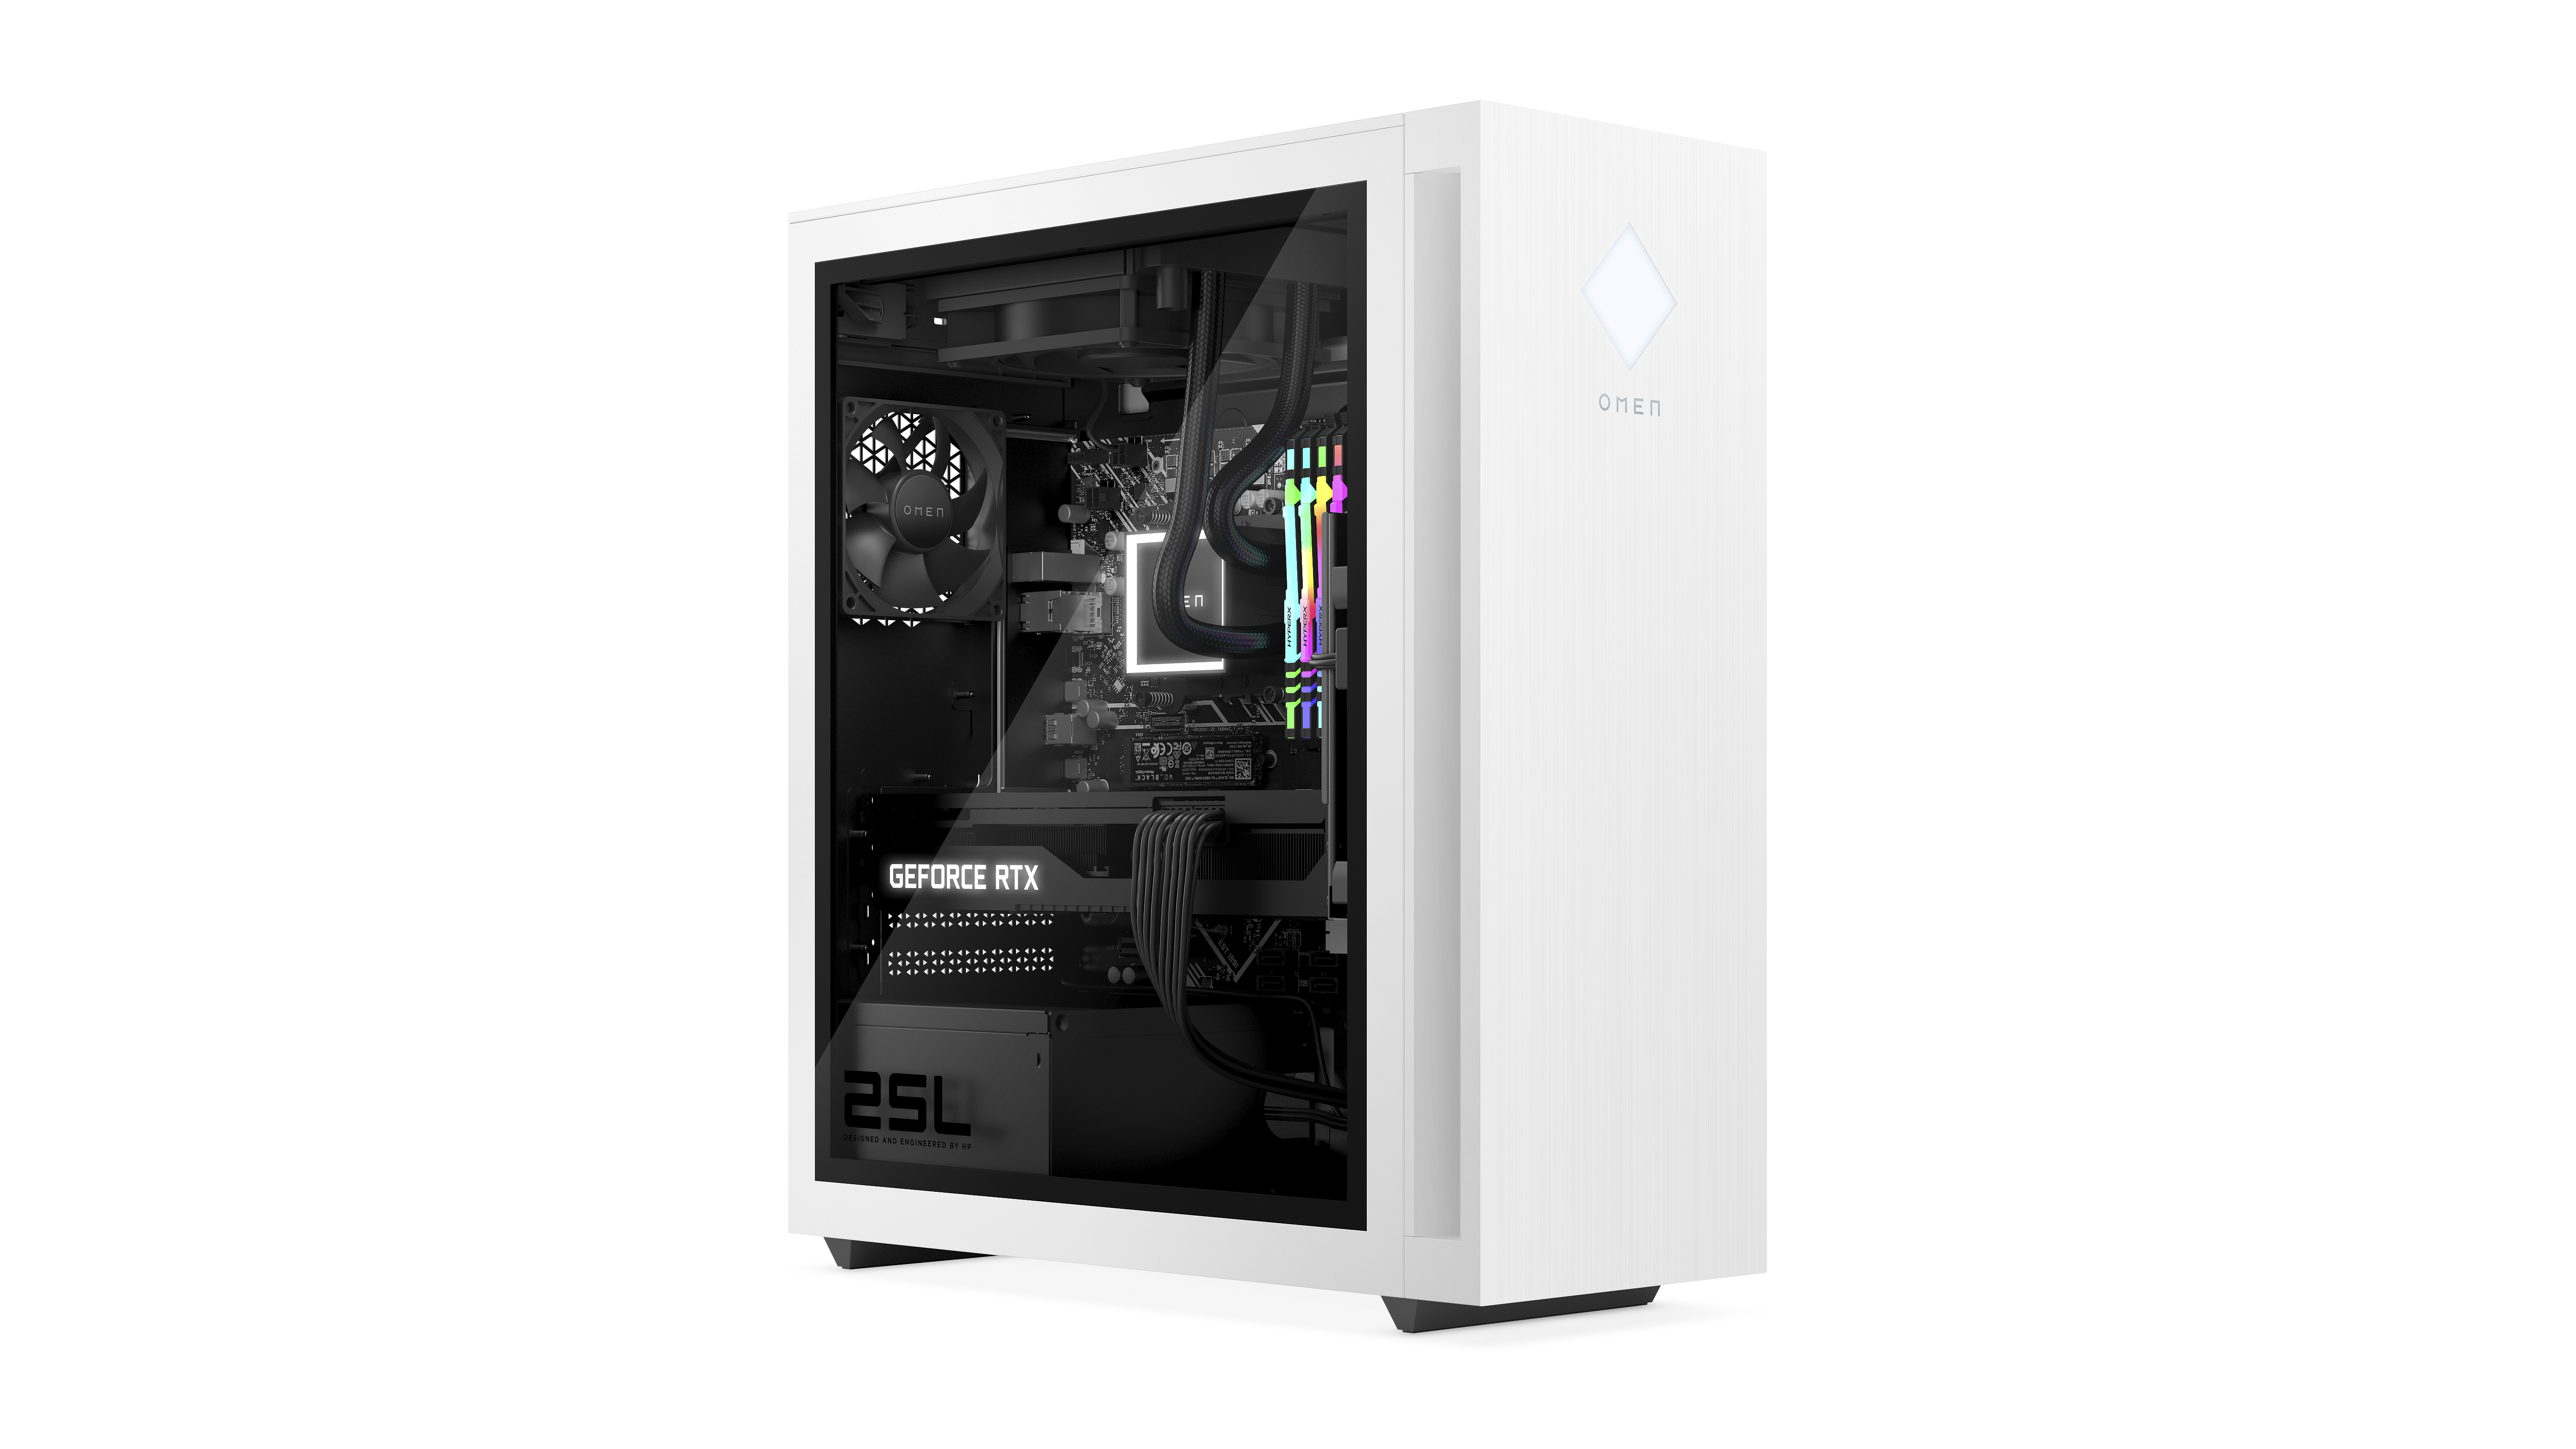 OMEN 25L Desktop gets major internal component upgrades, an added 120mm front fan, and a new Ceramic White case with an optional tempered glass side panel.